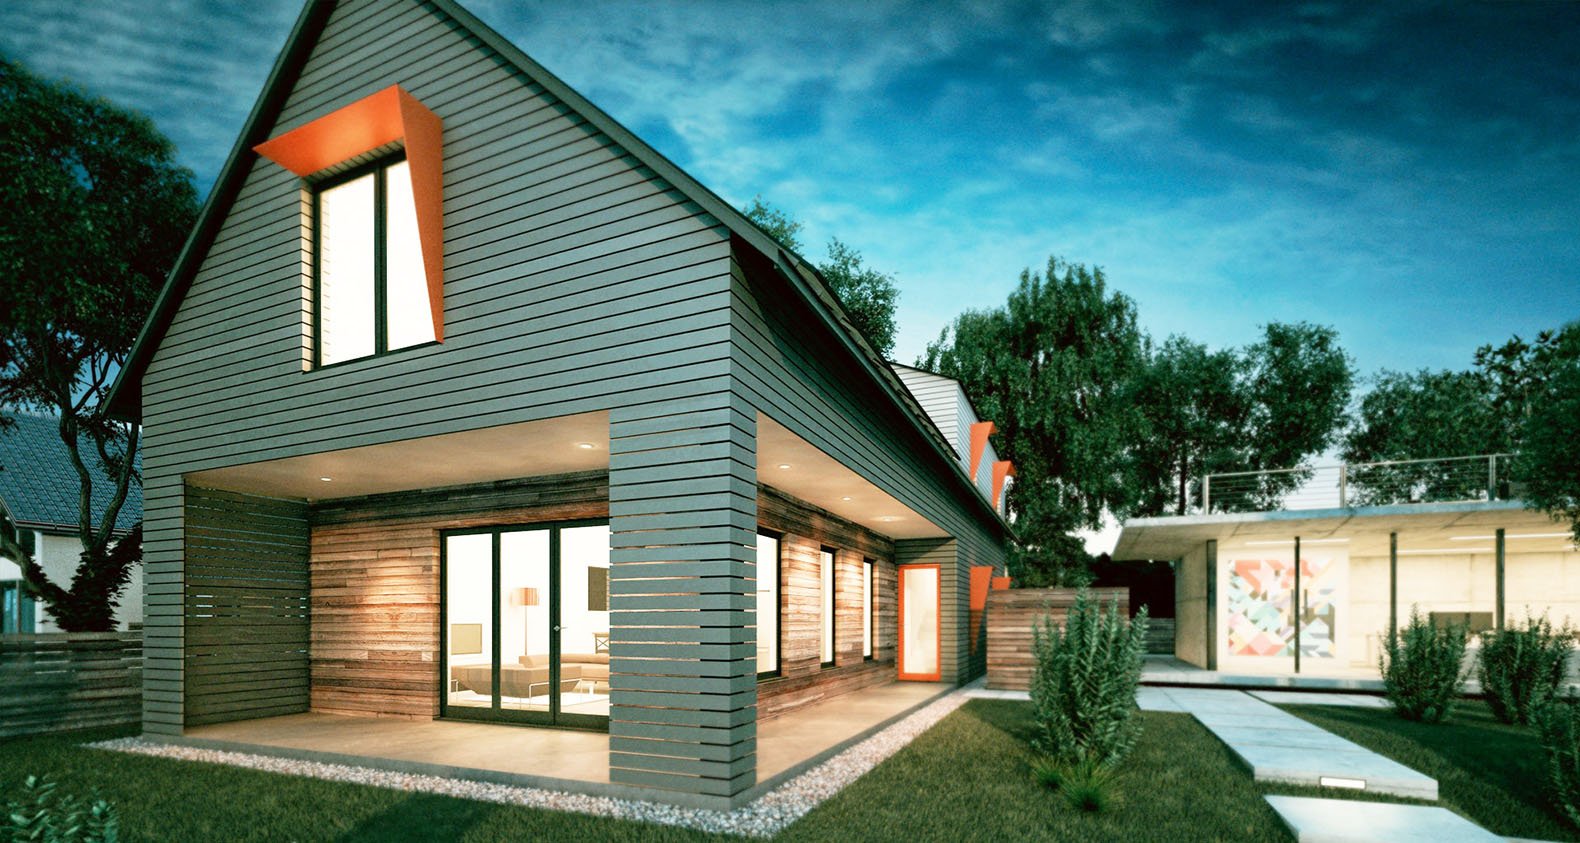 A rendering of a house with a roof extension and large windows, surrounded by trees.